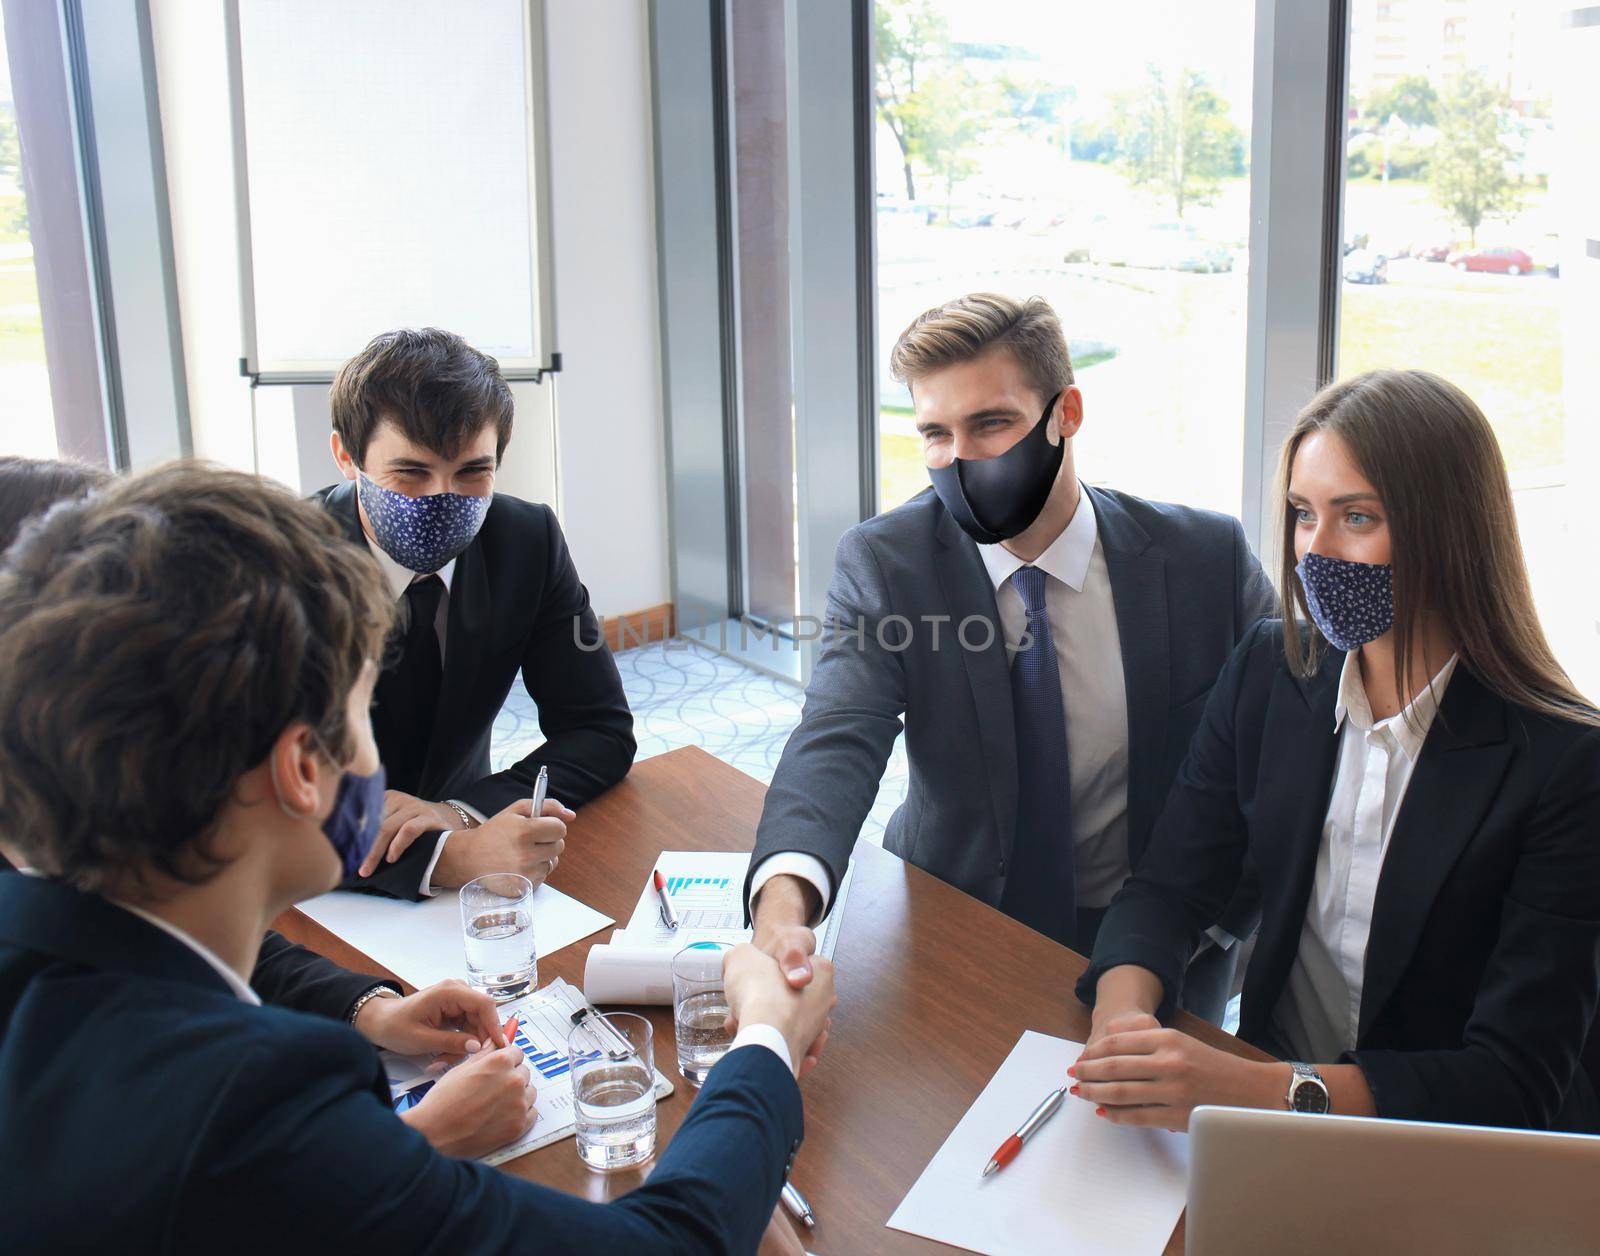 Businessman in preventive mask shaking hands to seal a deal with his partner and colleagues who also wear preventive masks in office. by tsyhun